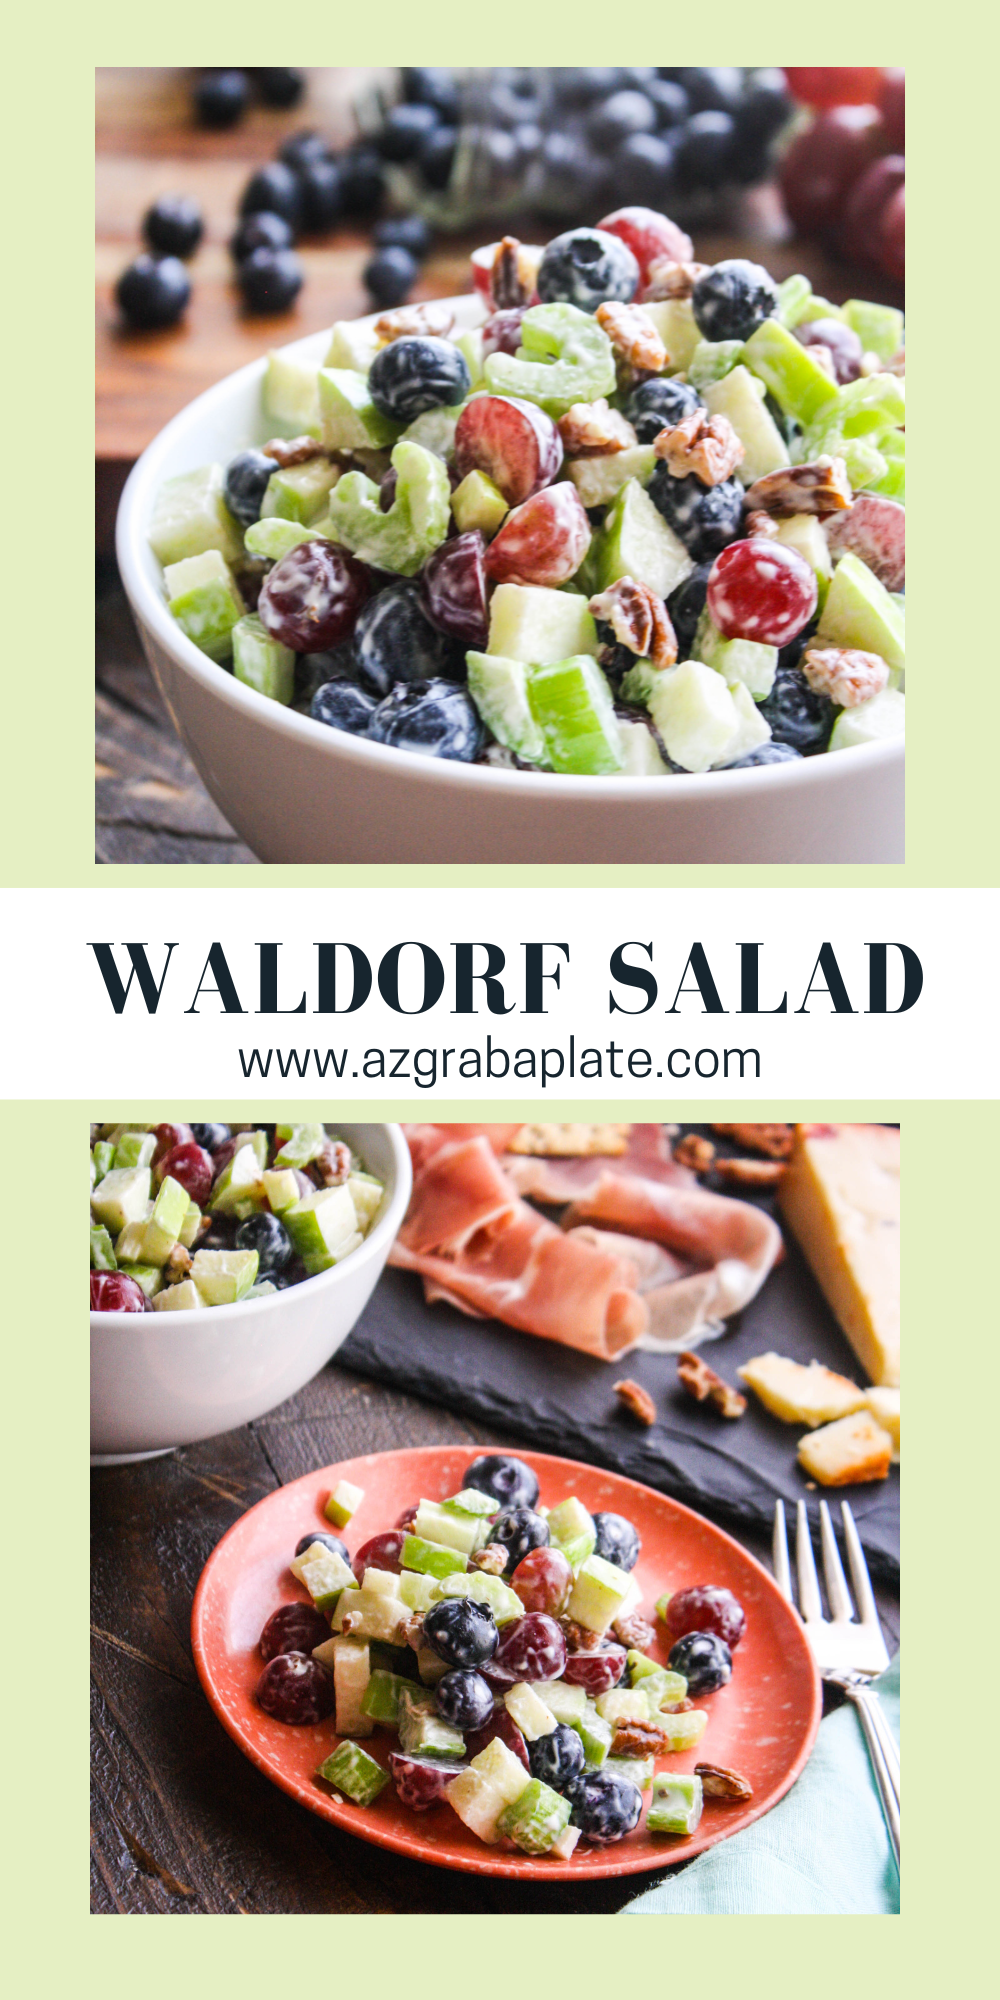 Waldorf salad is something to serve as part of a lighter meal!